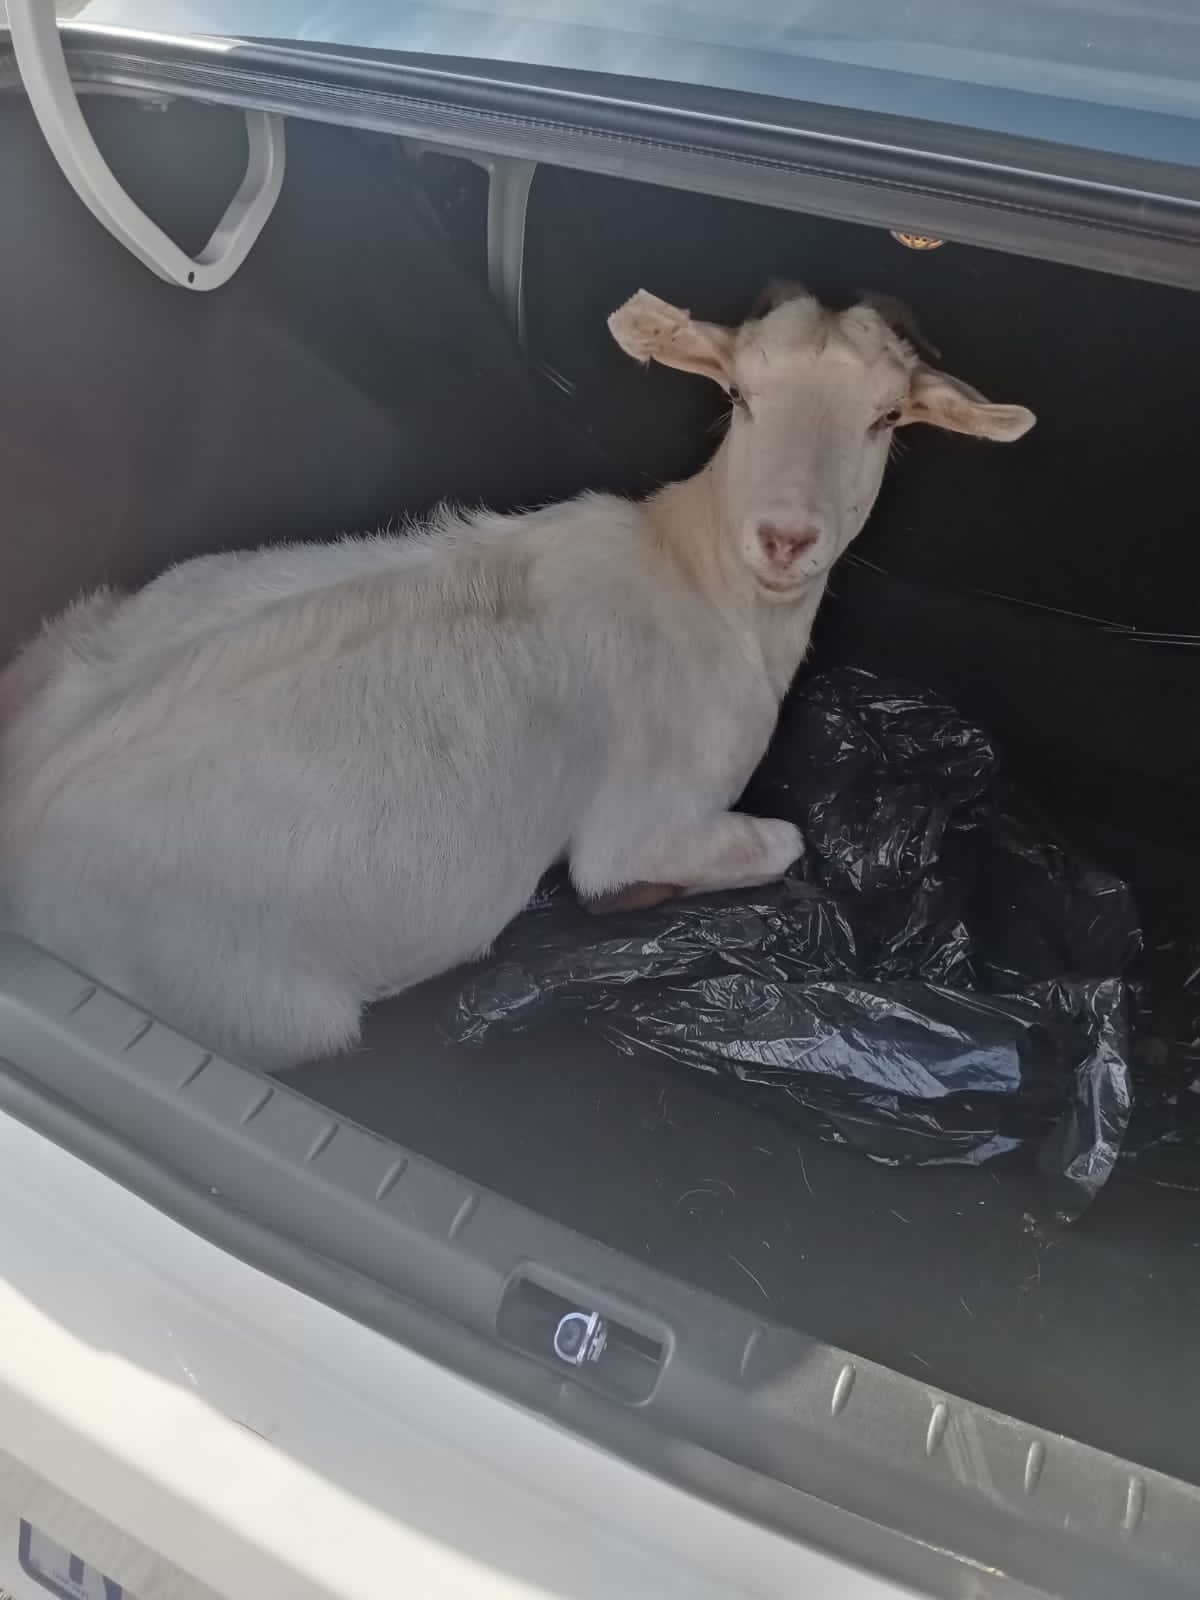 Stolen goat recovered, three suspects nabbed